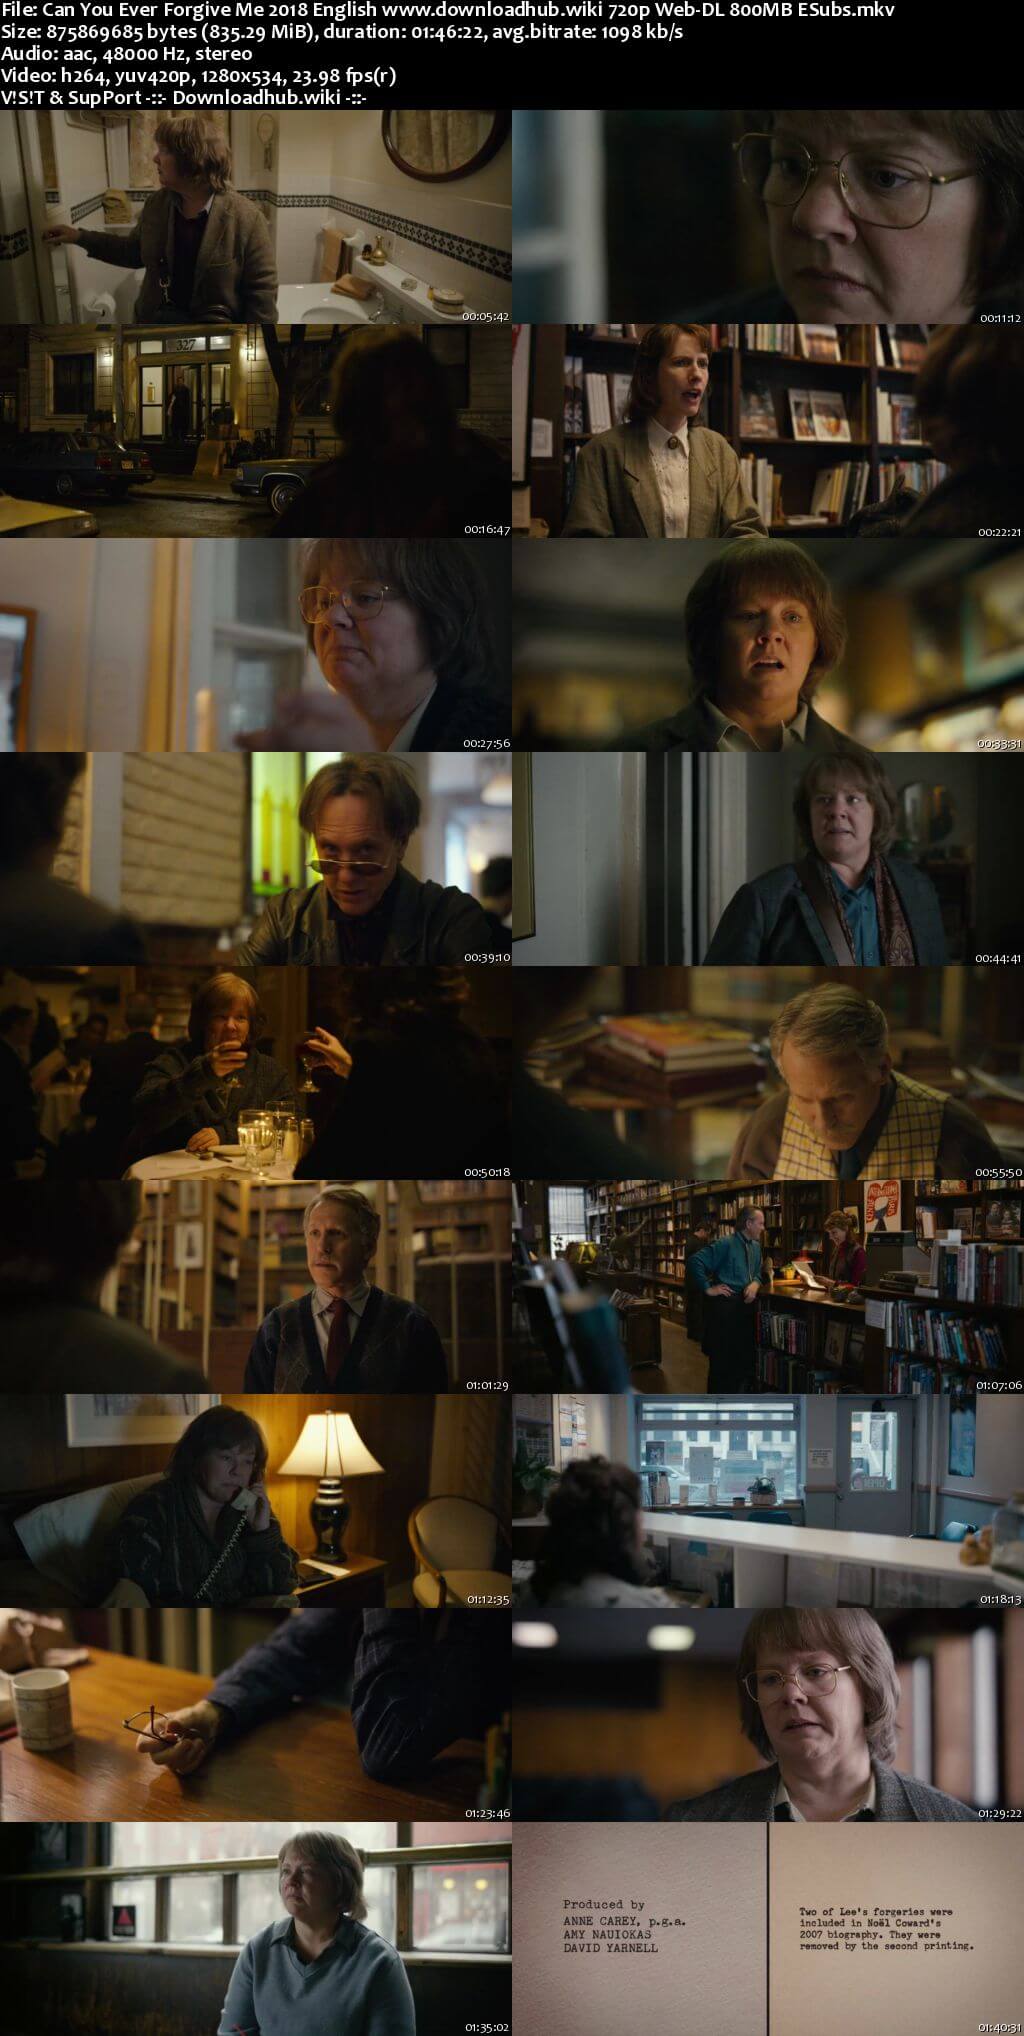 Can You Ever Forgive Me 2018 English 720p Web-DL 800MB ESubs